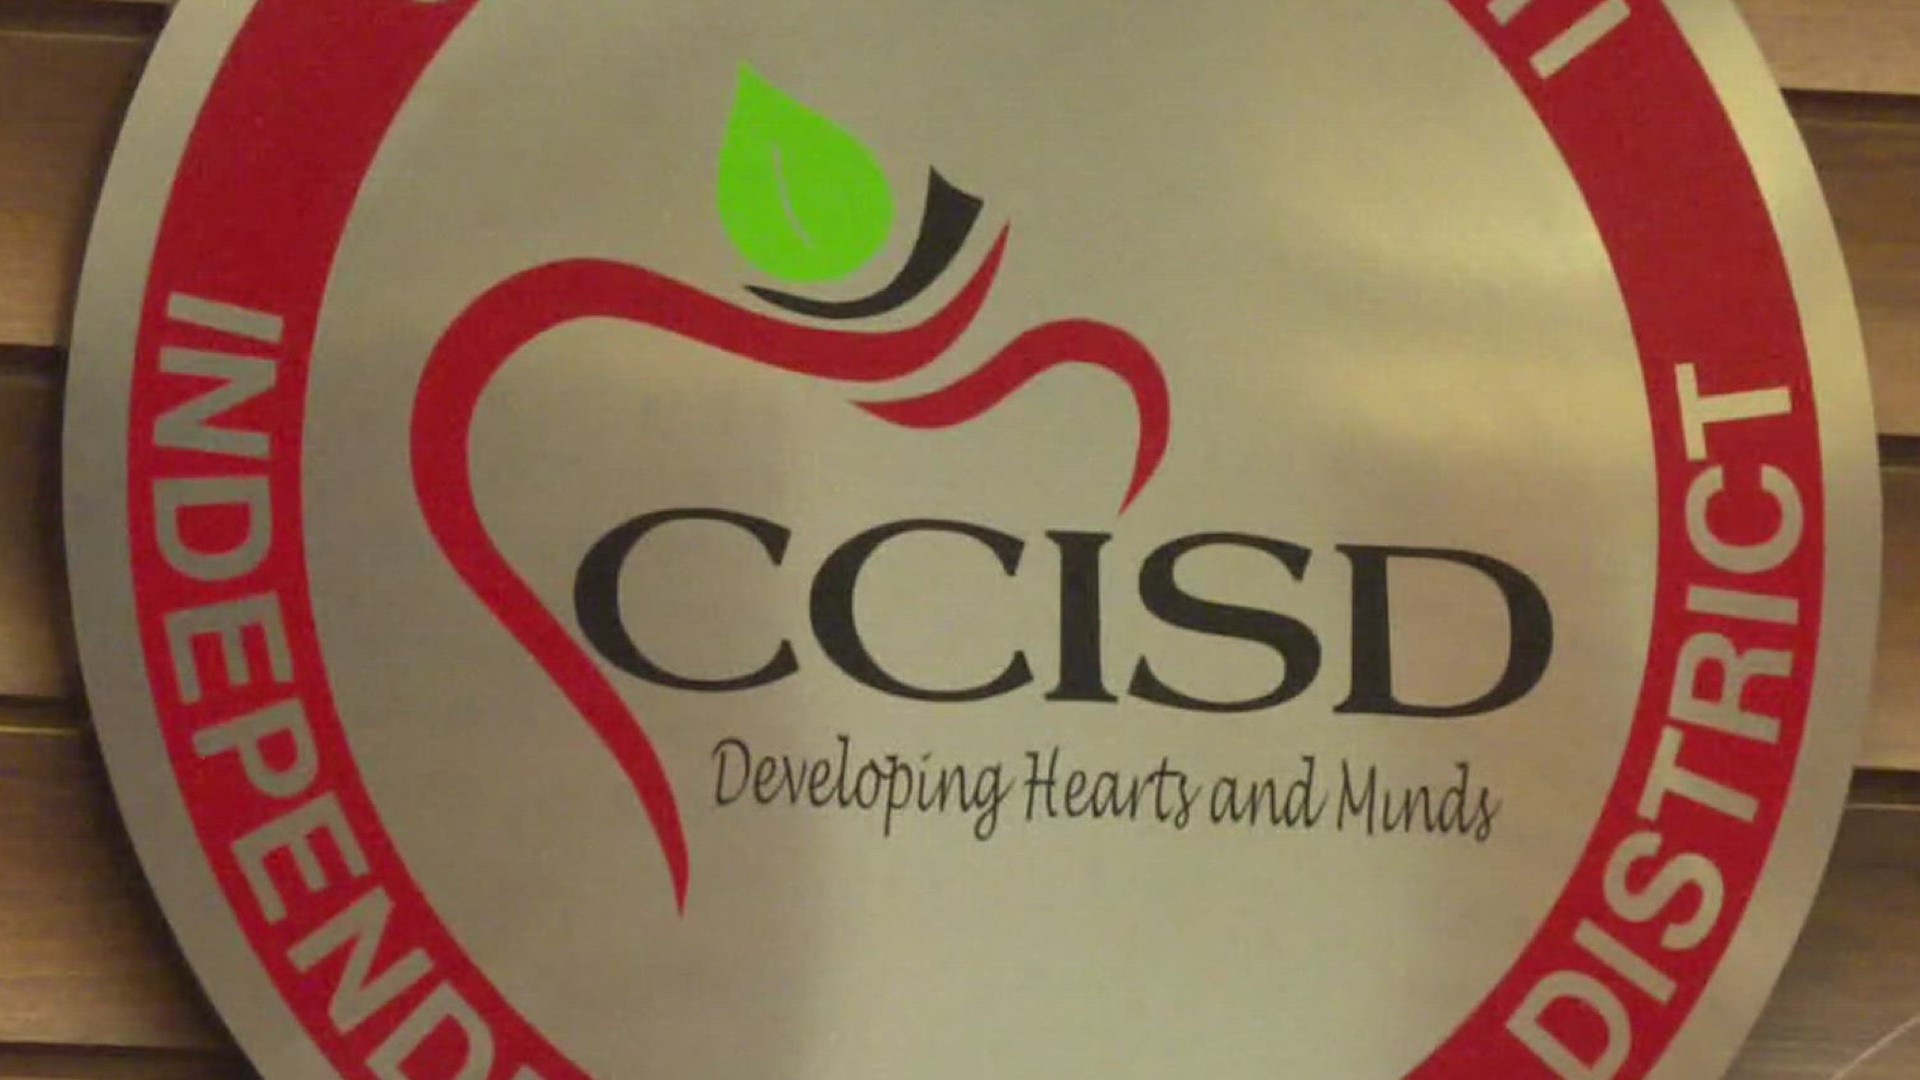 CCISD was one of two school districts in Texas accused Tuesday of discrimination and violating federal education and civil rights laws.